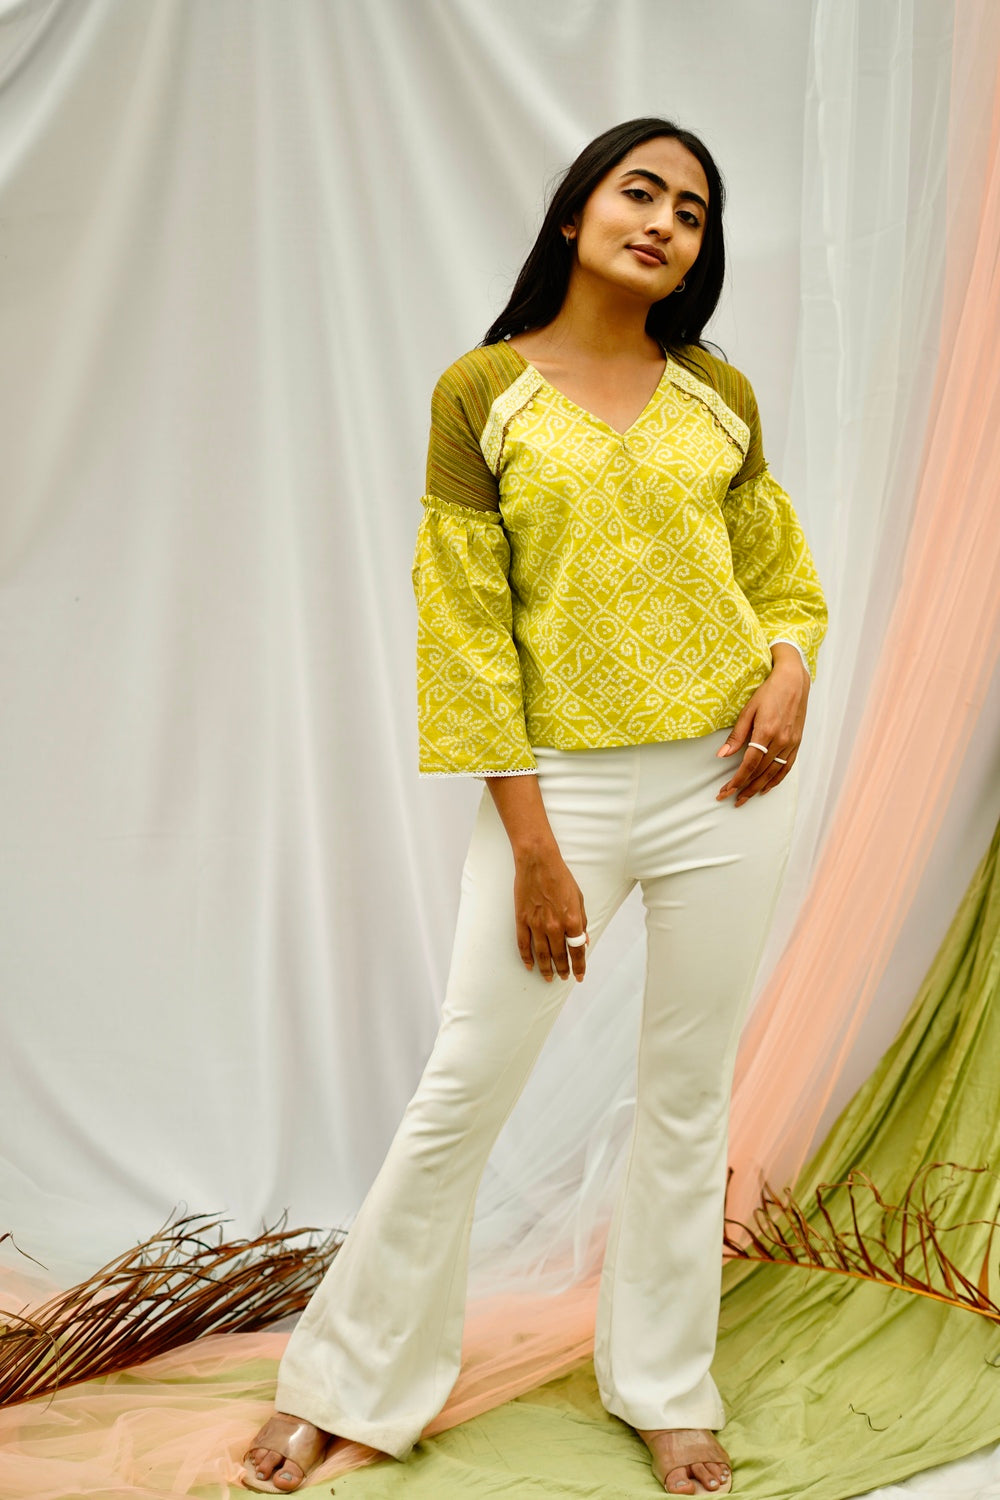 Frilled sleeve Bandhni Top - green (citronelle)